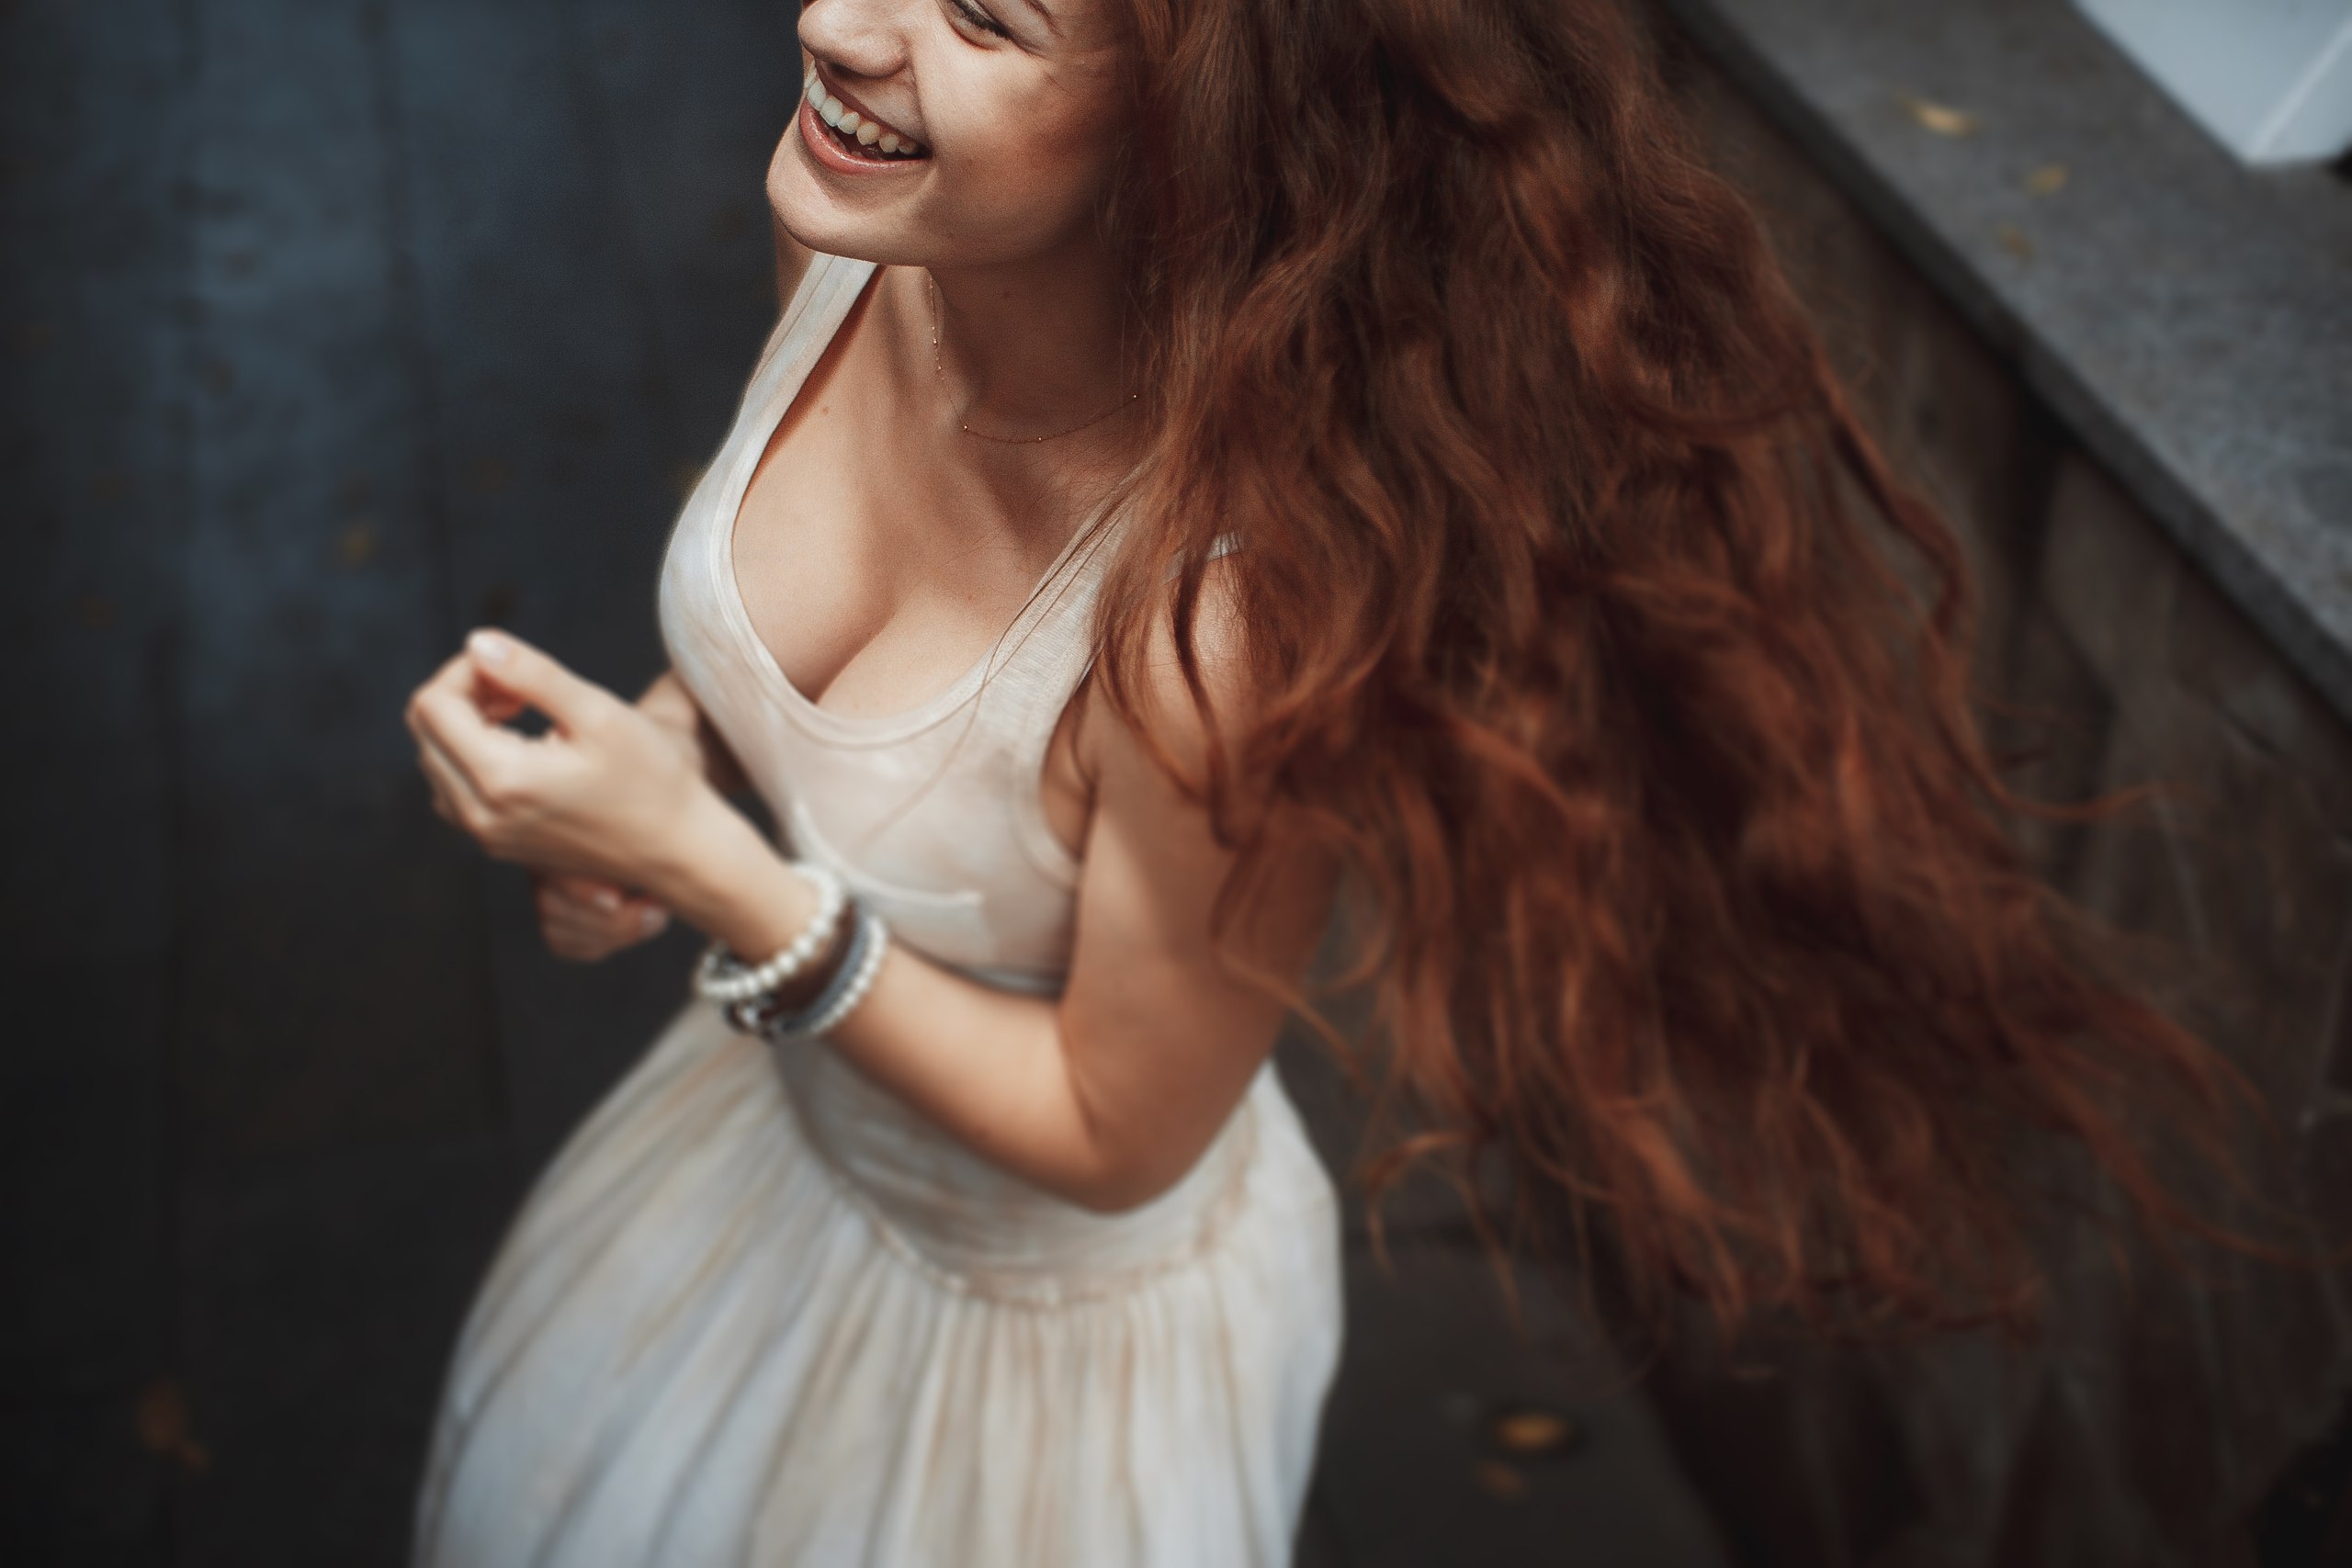 People 2560x1707 women model redhead long hair portrait women outdoors smiling necklace cleavage white tops skirt depth of field